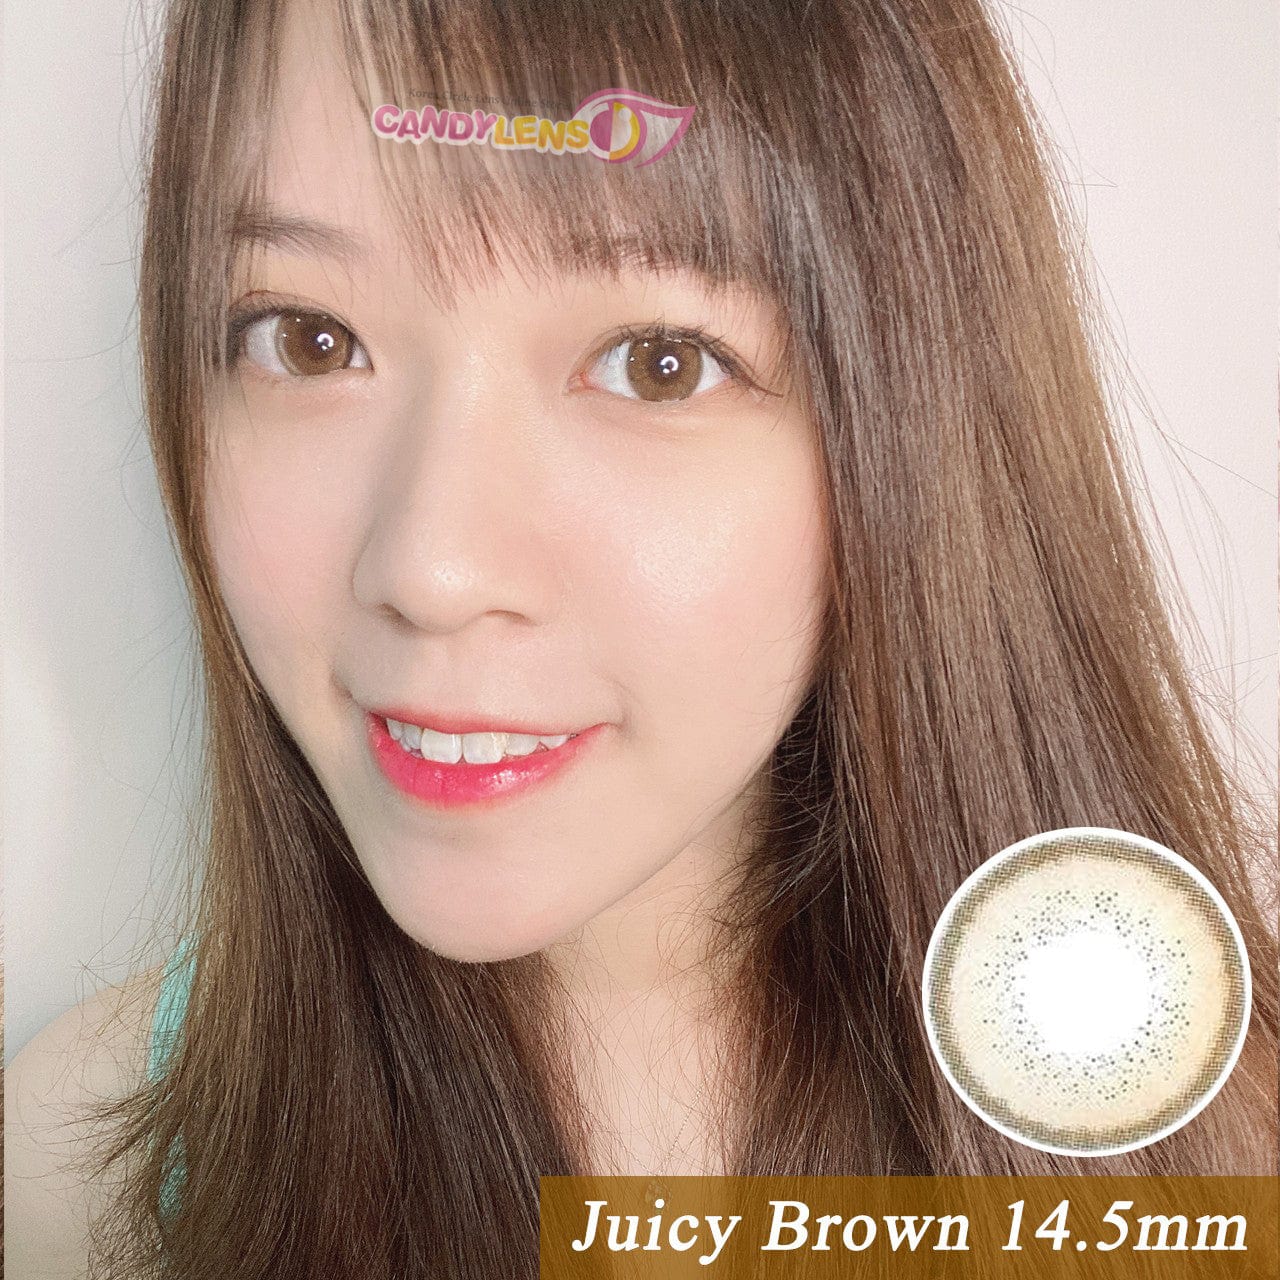 Royal Candy (monthly) Juicy Brown